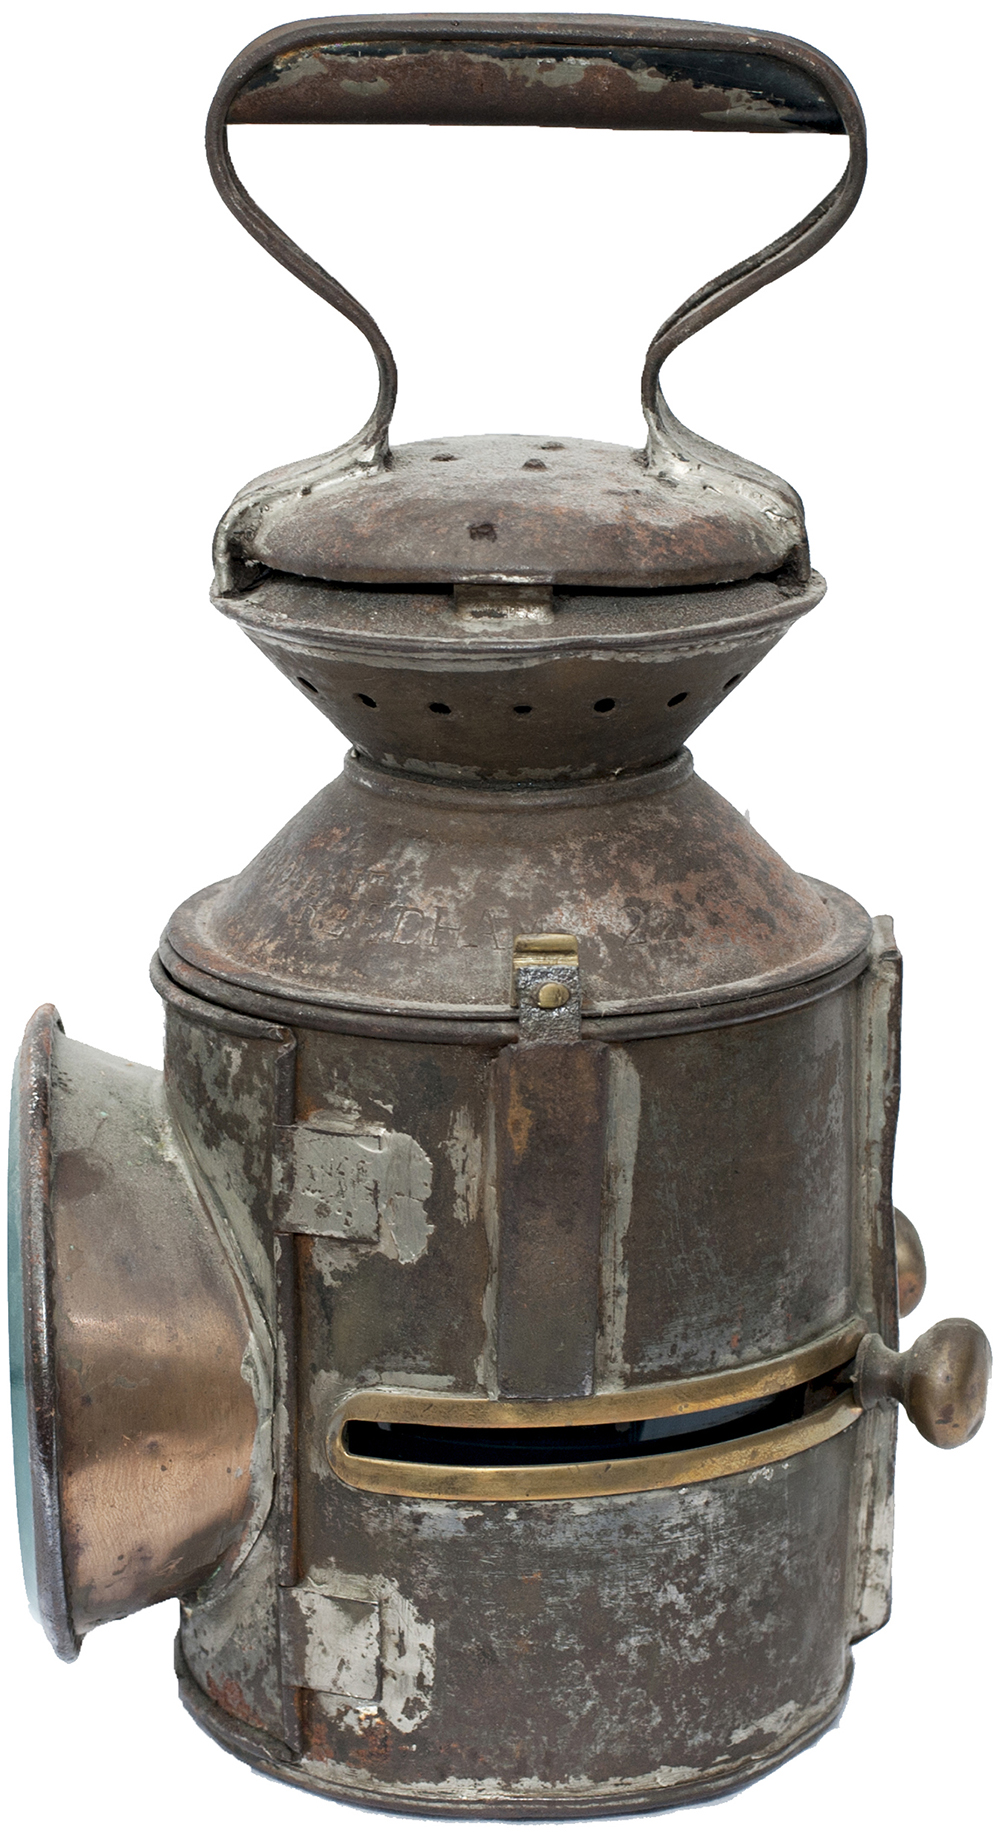 LNER/GER 3 aspect sliding knob handlamp, stamped in the reducing cone REEDHAM 22 and date coded